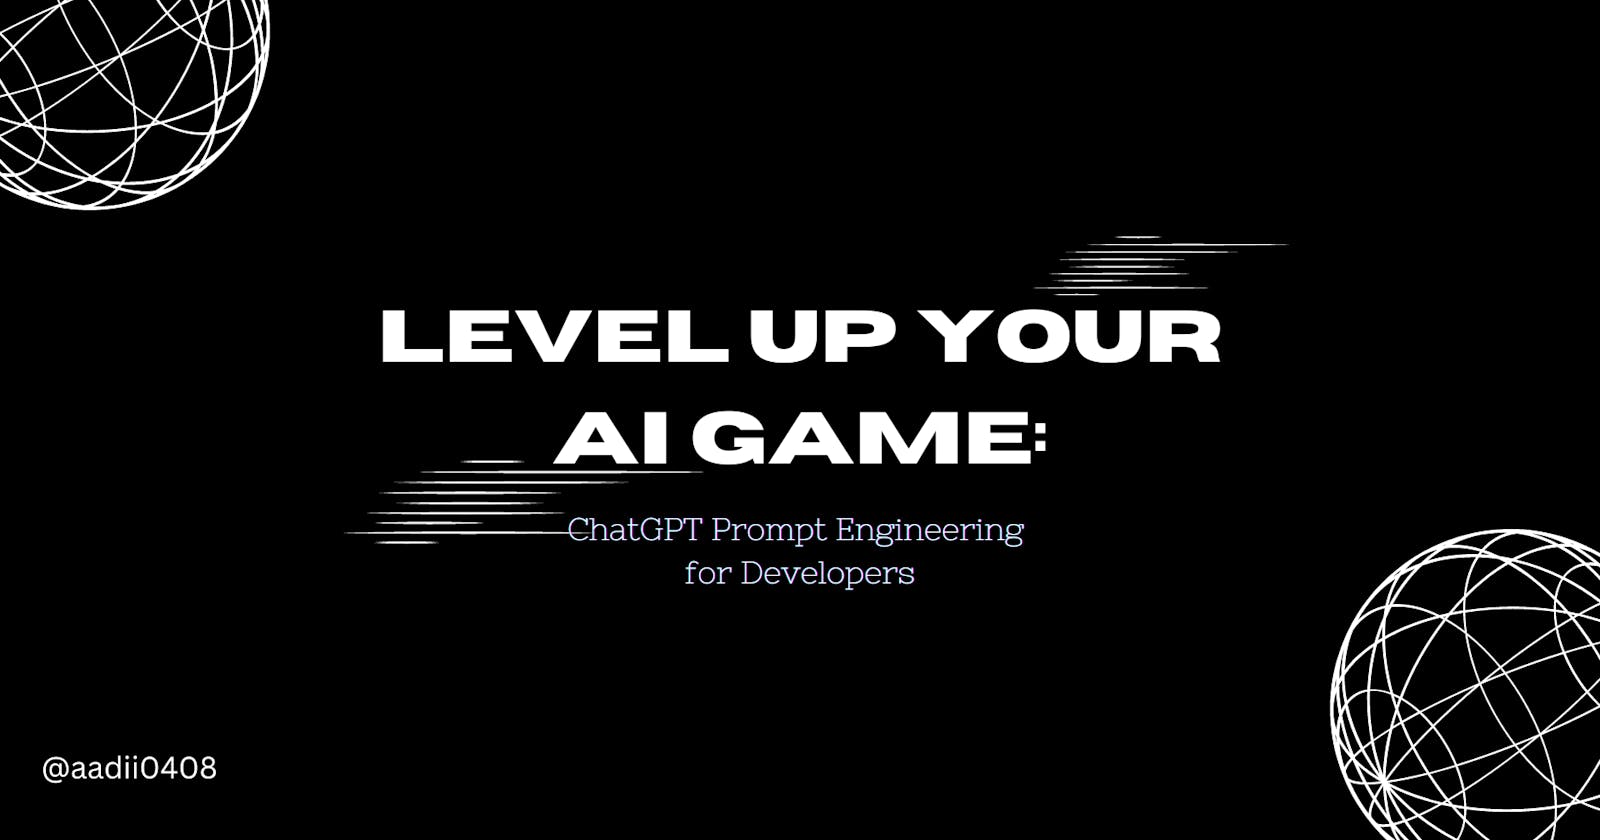 Level Up Your AI Game: "Mastering ChatGPT Prompt Engineering for Developers"